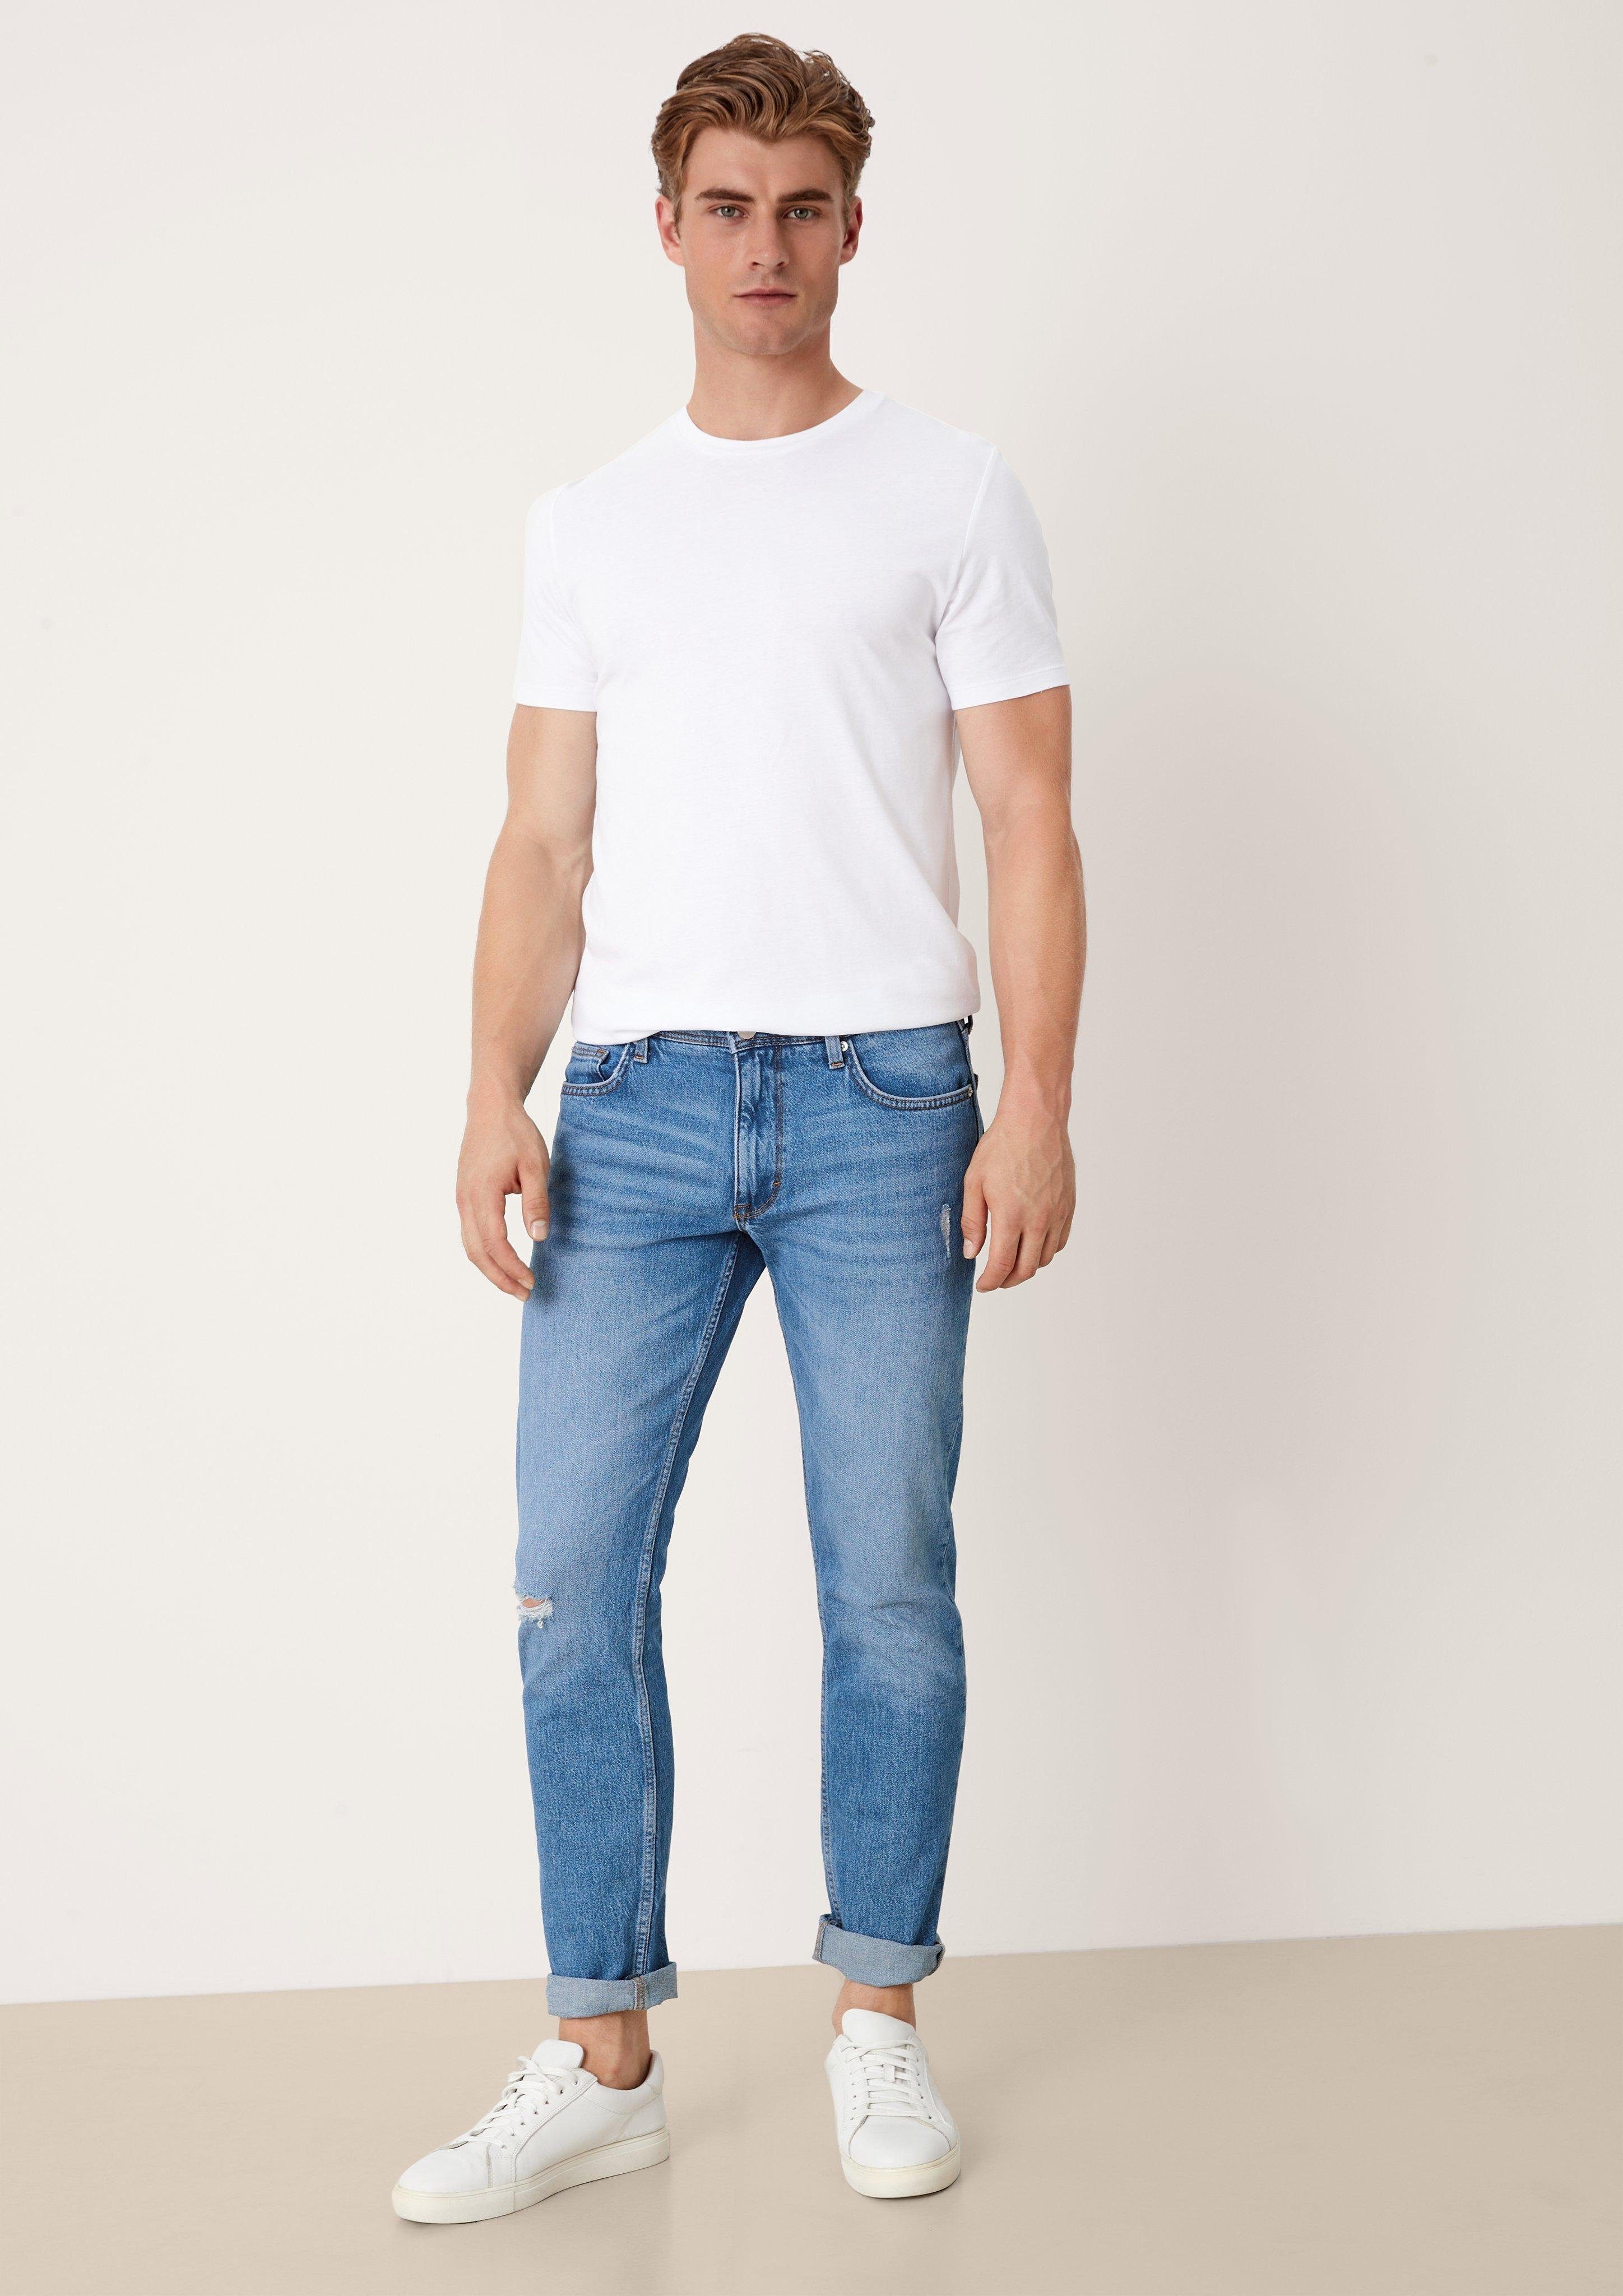 s.Oliver Stoffhose Jeans York ozeanblau Leg Destroyes, / Rise Regular / Fit Straight Waschung, Mid / Label-Patch